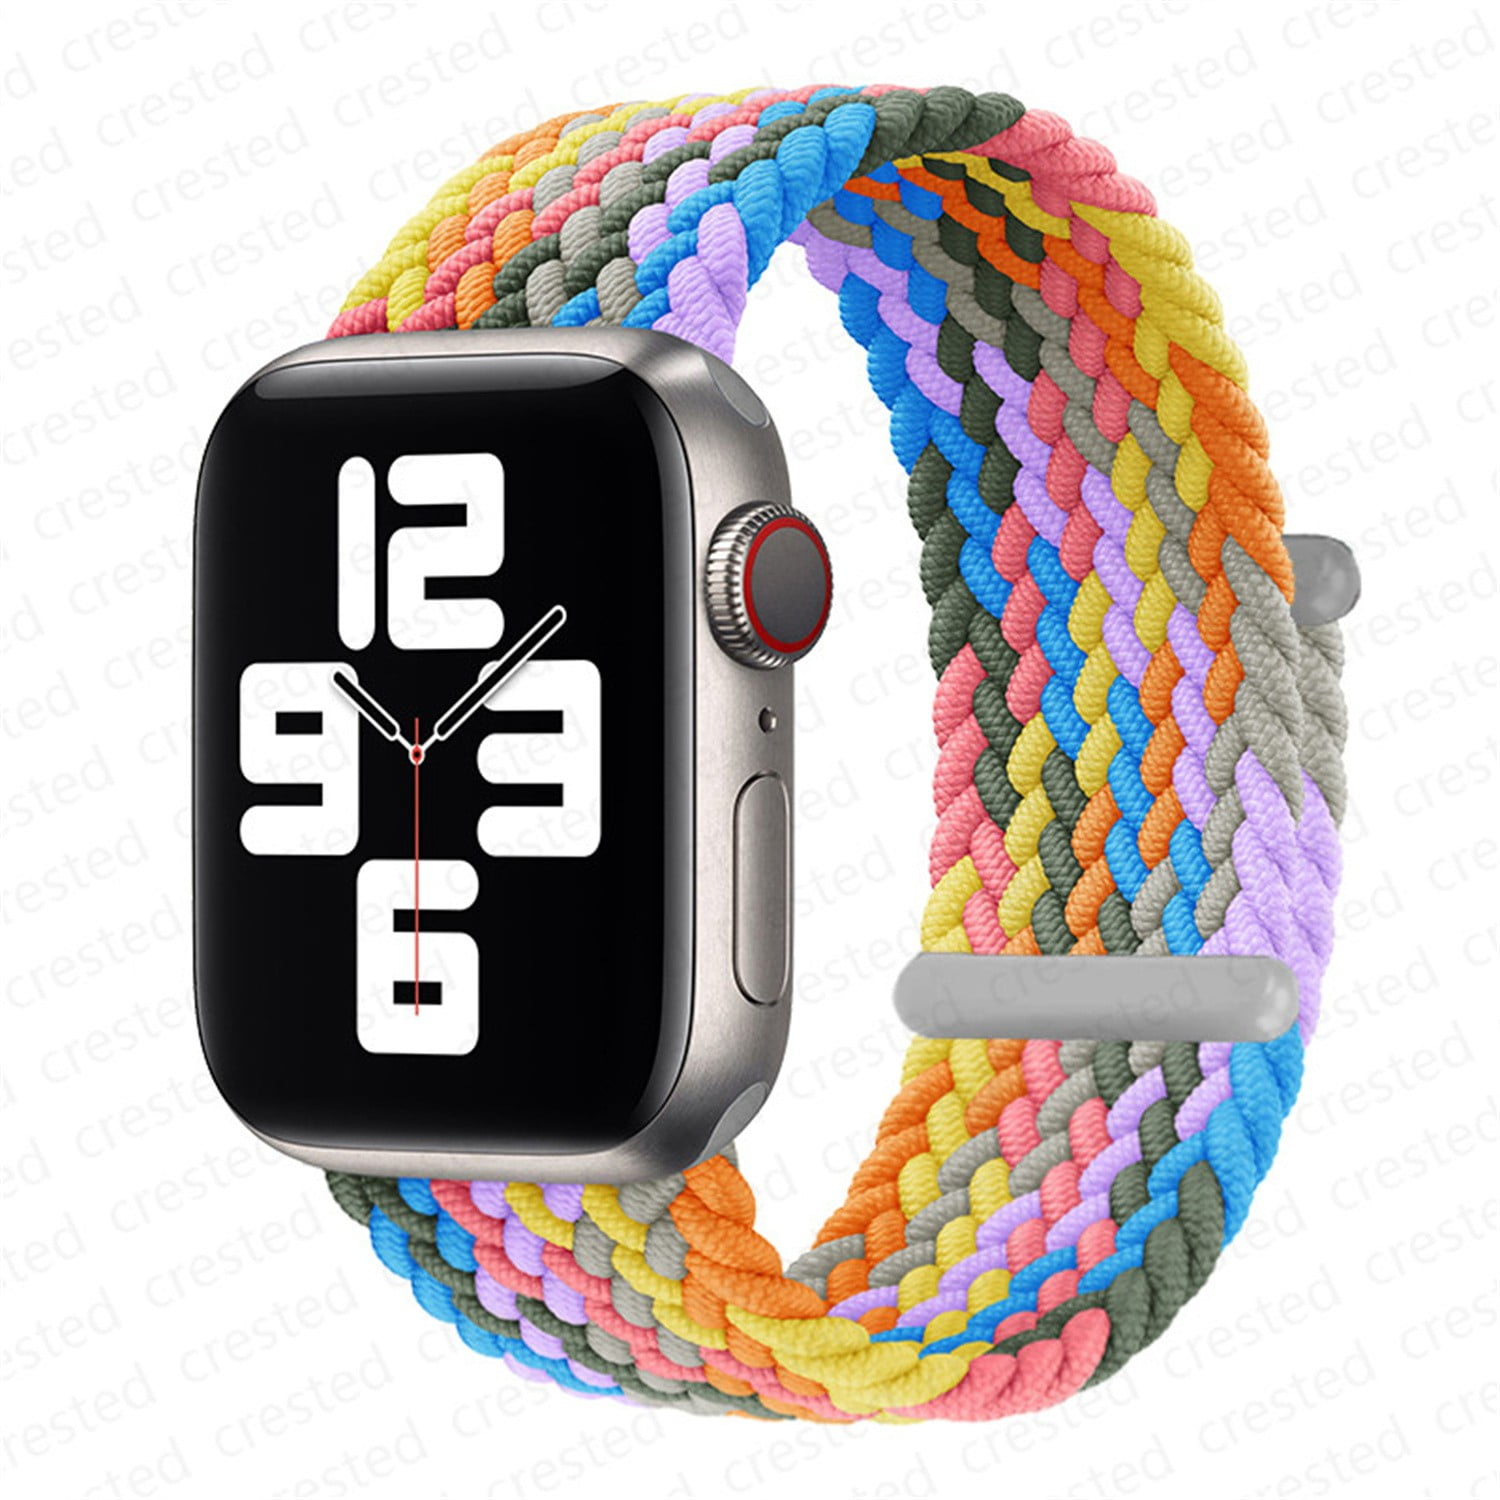 Braided Nylon Solo Loop band for Apple Watch Bands 40mm 44mm 45mm 41mm 42mm 38mm, Belt Bracelet Strap for iWatch series 4 5 SE 6 7 purple Rainbow - Walmart.com